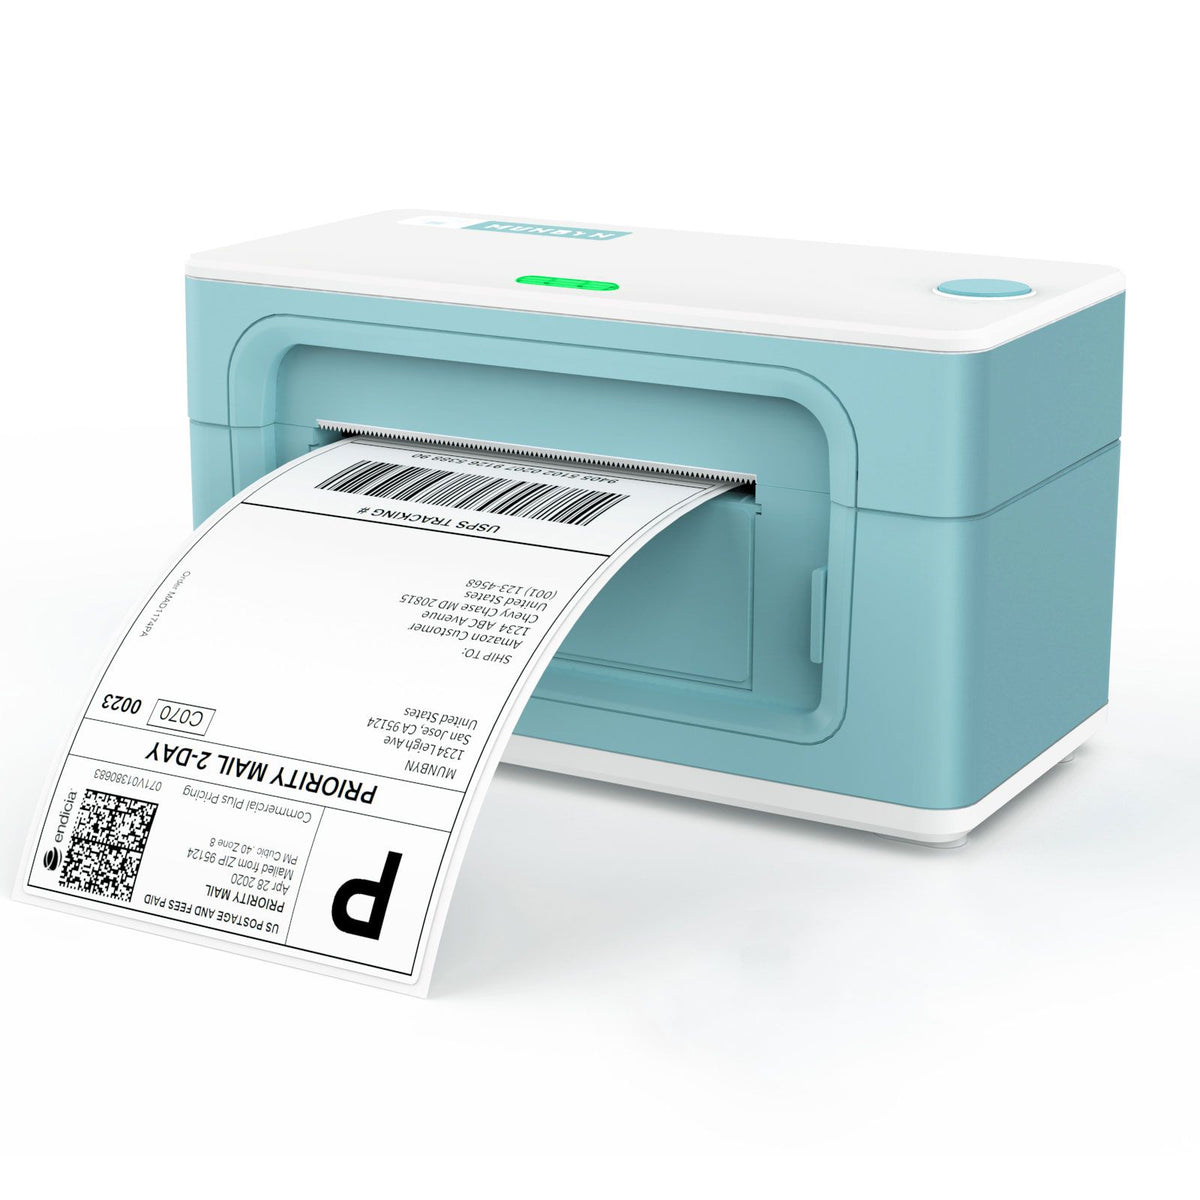 The MUNBYN USB 4x6 thermal sticker label printer is a high-speed, reliable, and easy-to-use printer that is perfect for printing shipping labels, address labels, and other custom labels.